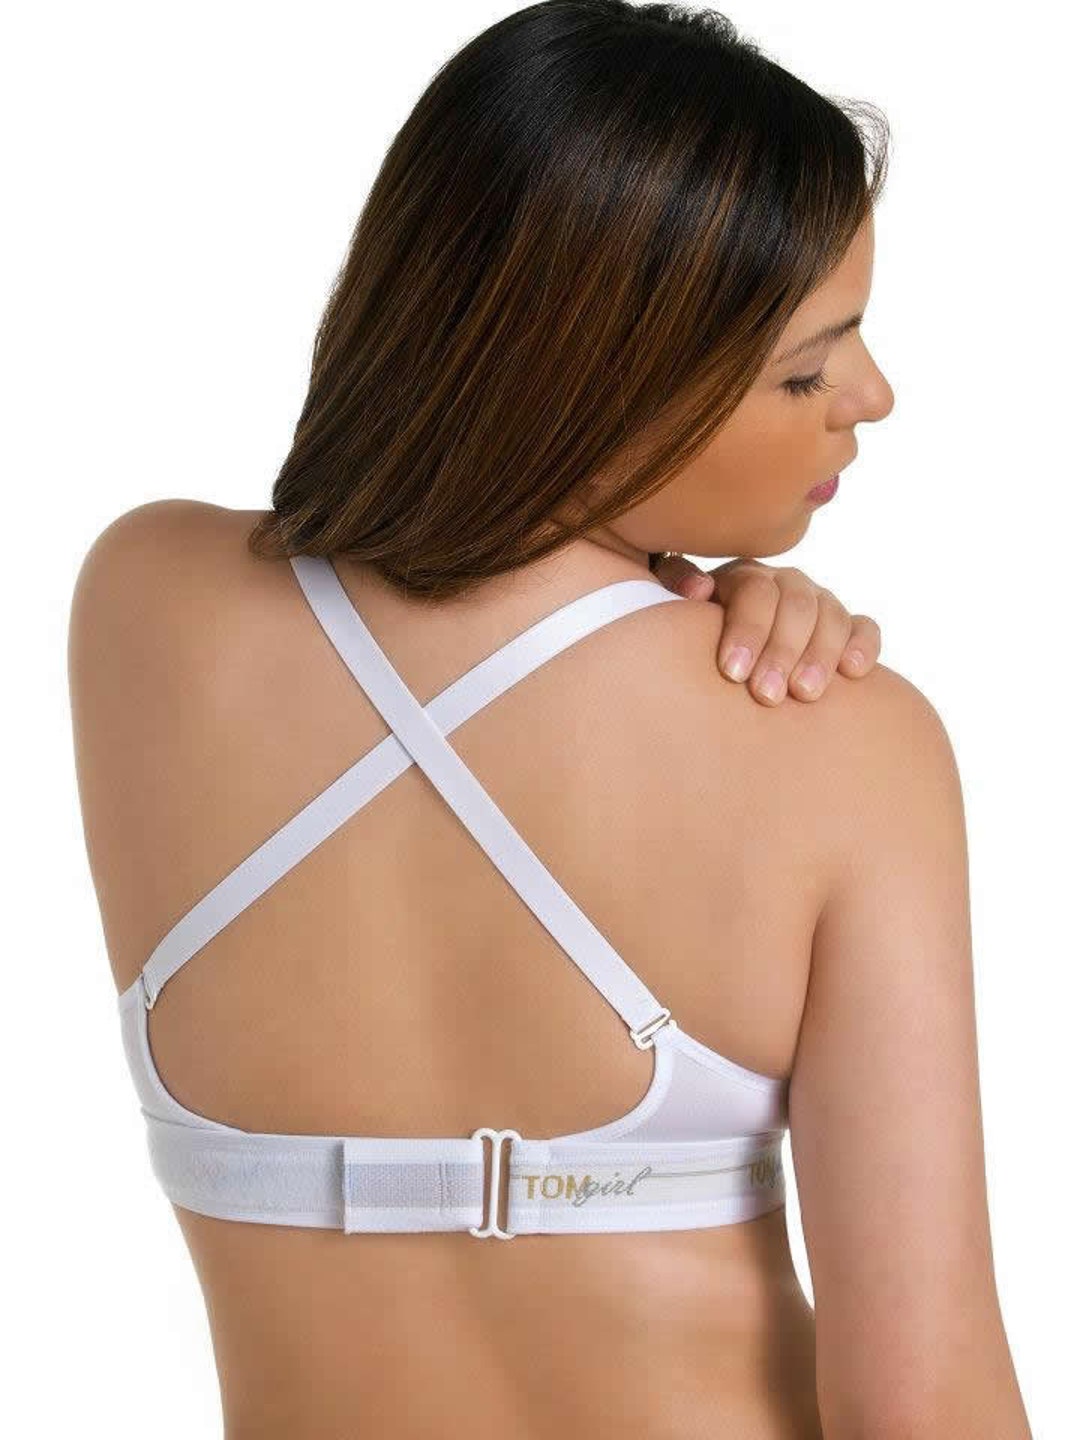 Buy 28D White Bralette With Hook and Loop Closure, Yoga Bra, Adjustable  Bralette Provides Comfort and Support, Convertible Bralette,crossback  Online in India 